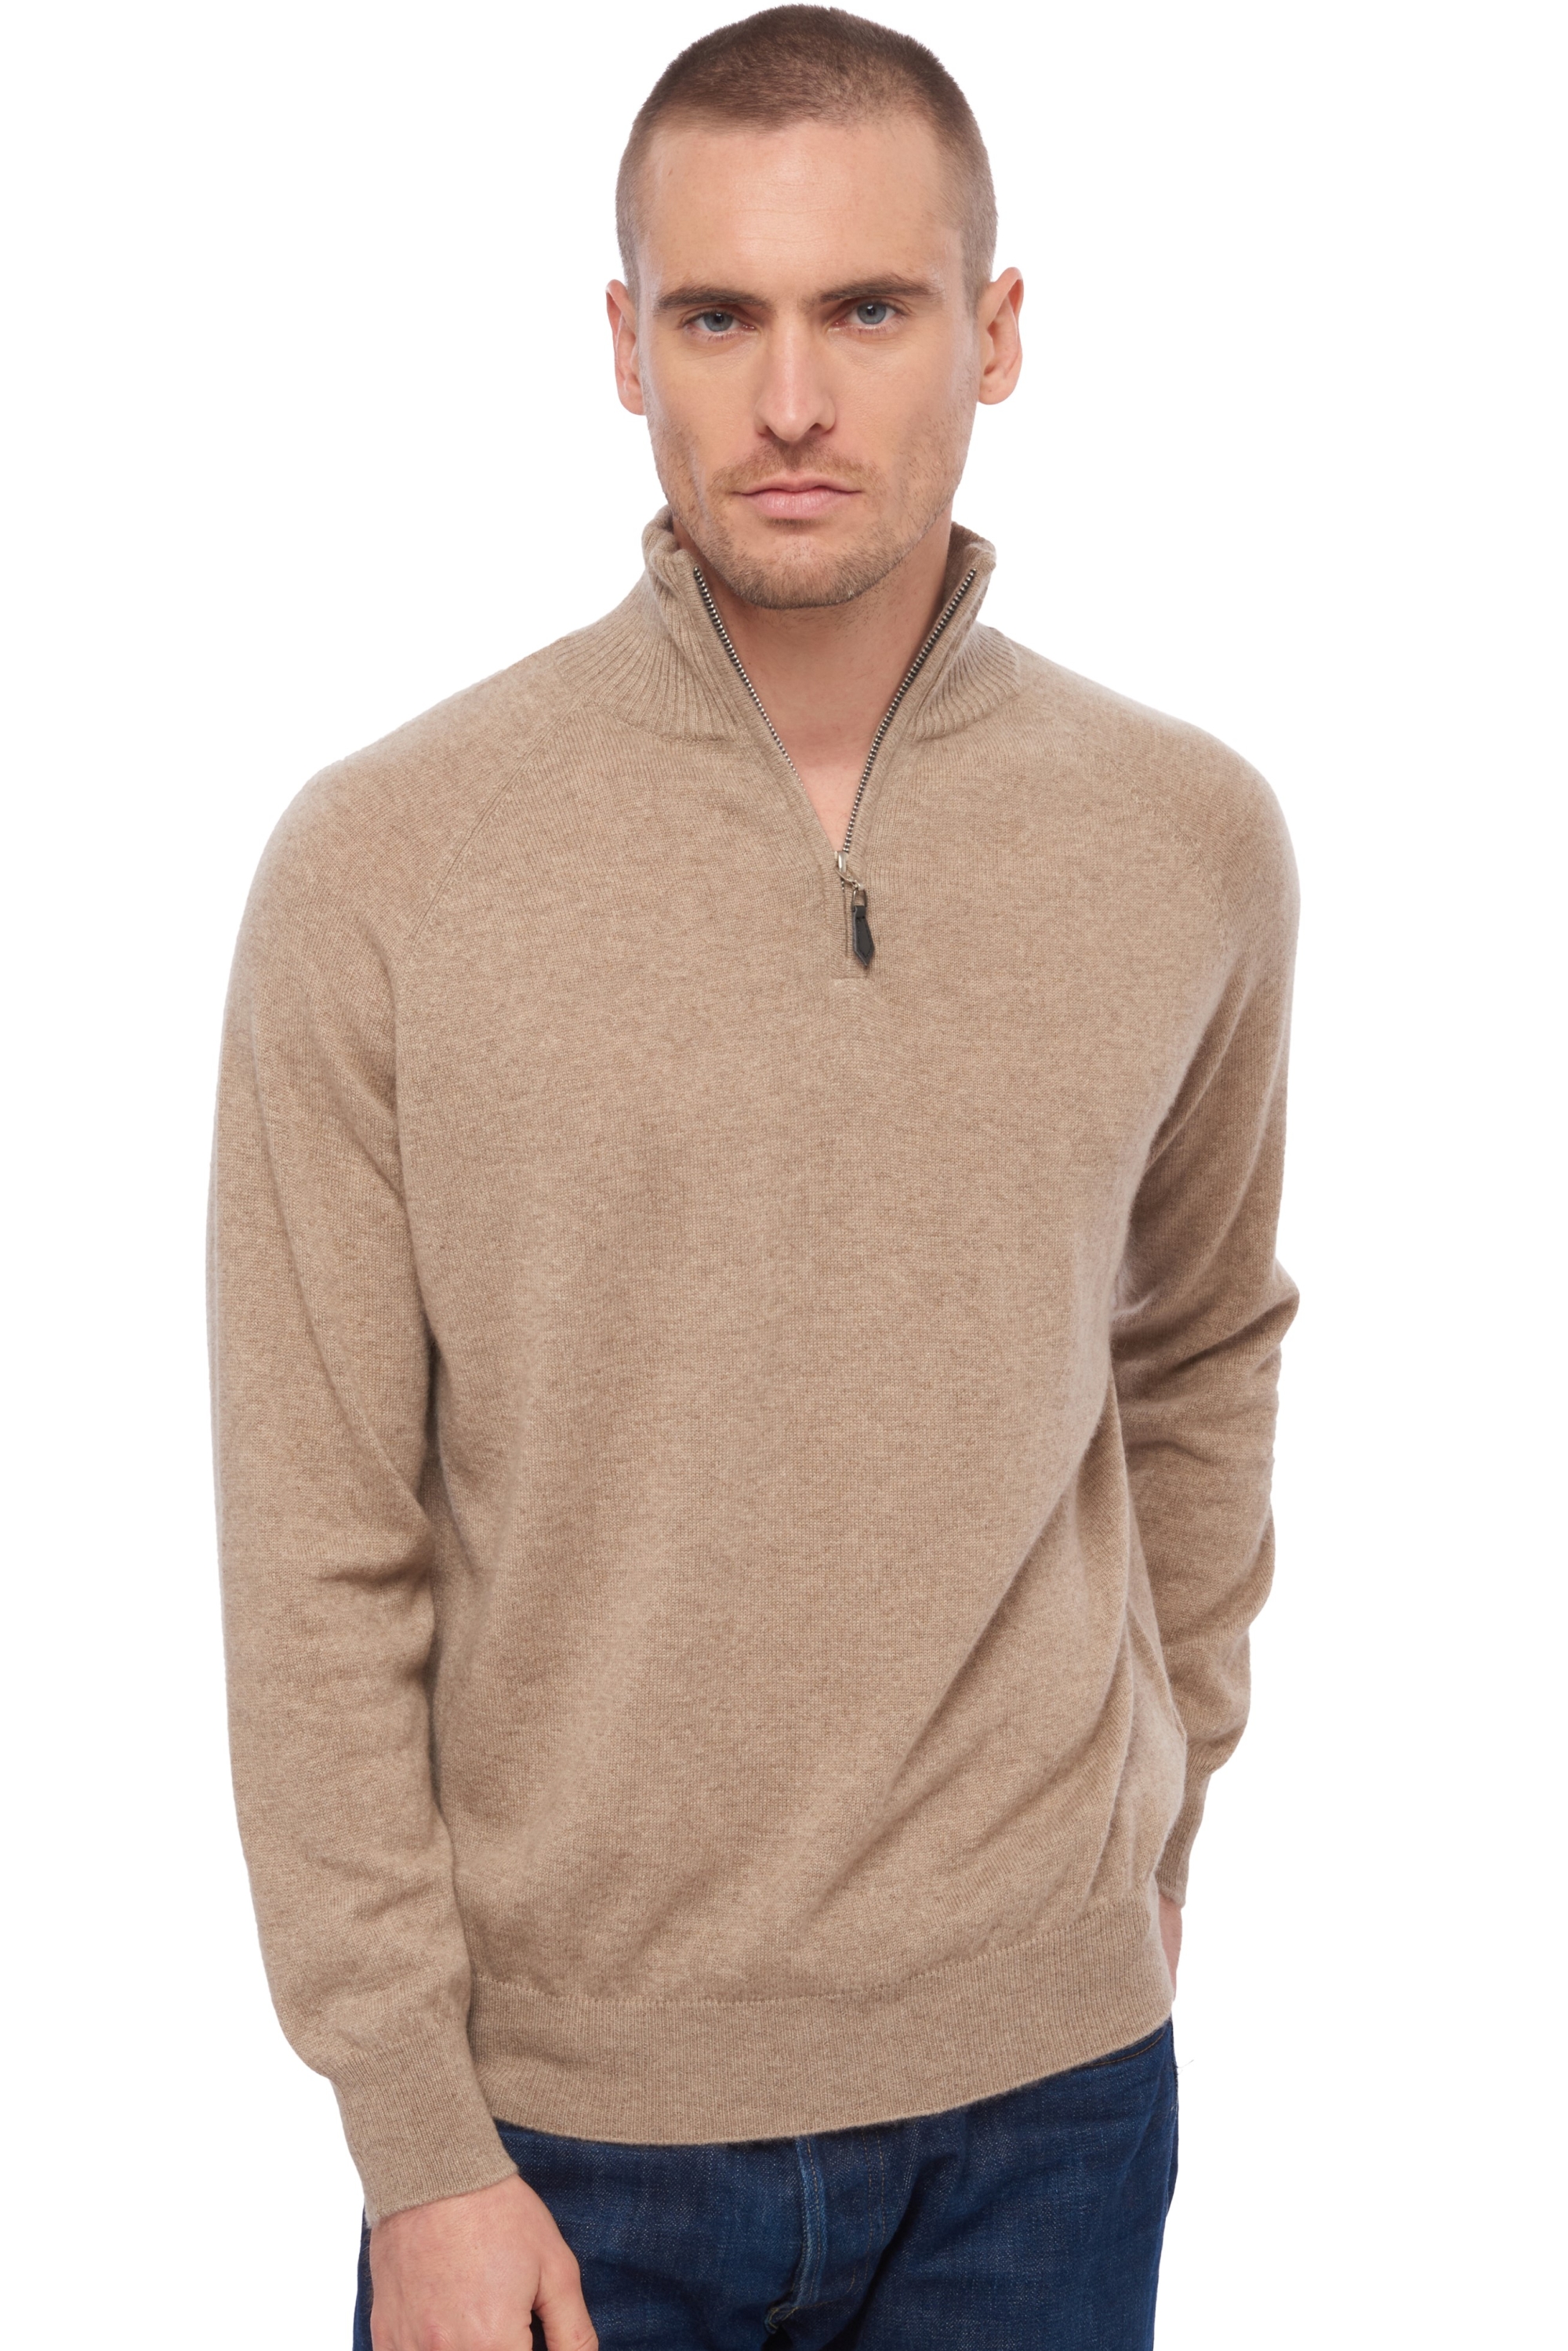 Cachemire pull homme natural vez natural brown s